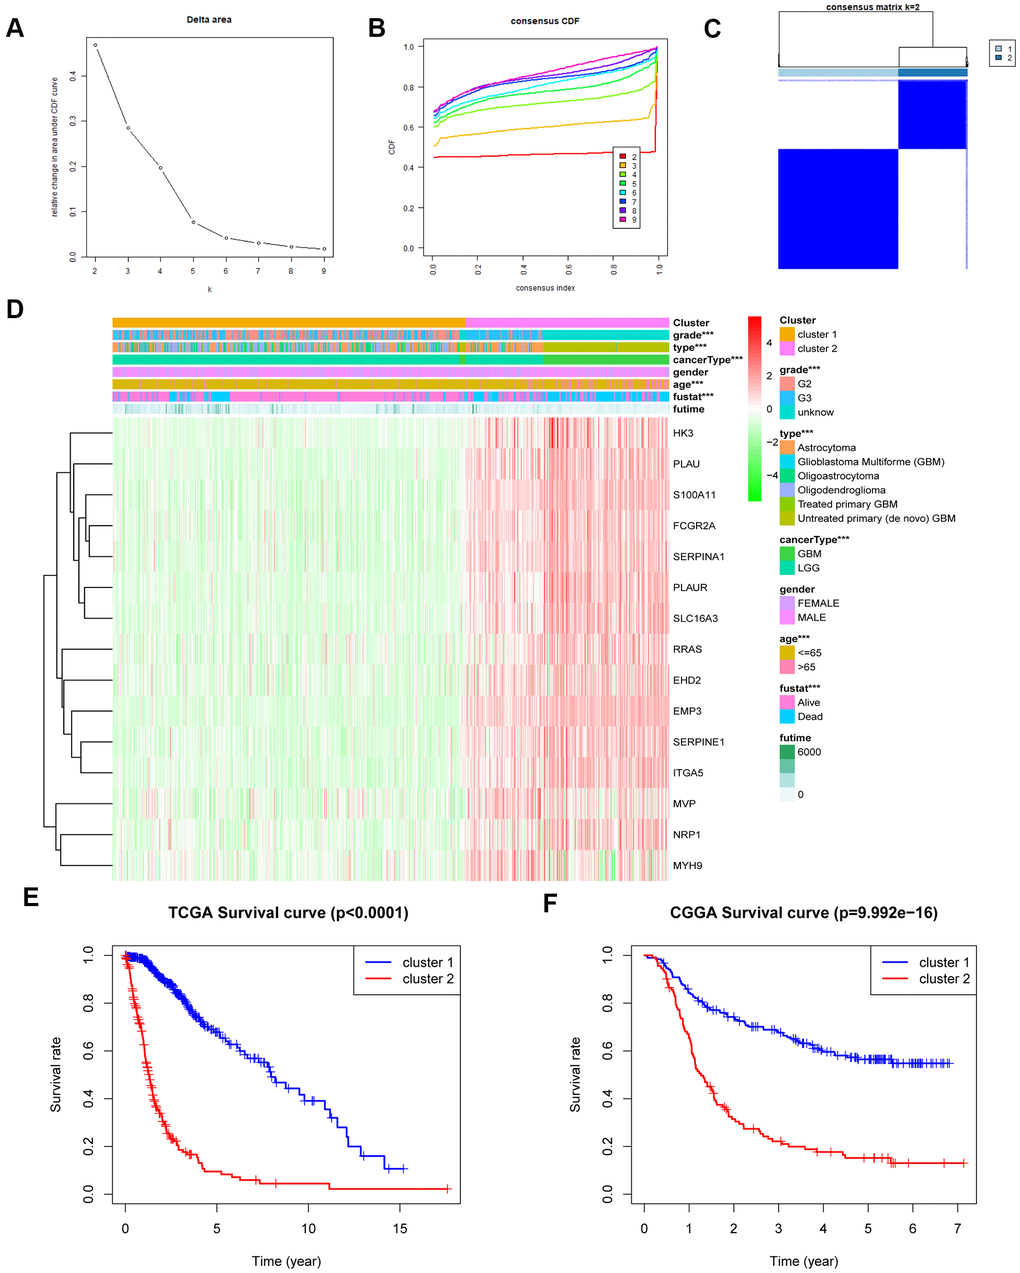 MES-related gene sets could classify the clinical and molecular features of gliomas. (A) Relative change in the area under the CDF curve for k = 2 to k = 9. (B) Consensus clustering CDF for k = 2 to k = 9. (C) Consensus clustering matrix of 650 samples from the TCGA dataset for k = 2. (D) Heat map of MES-related genes between cluster 1 and cluster 2 of the TCGA cohort. (E) Survival analysis of patients in cluster 1 and cluster 2 based on TCGA clinical data. (F) Survival analysis of patients in cluster 1 and cluster 2 based on CGGA clinical data. CDF, cumulative distribution function; ***P 